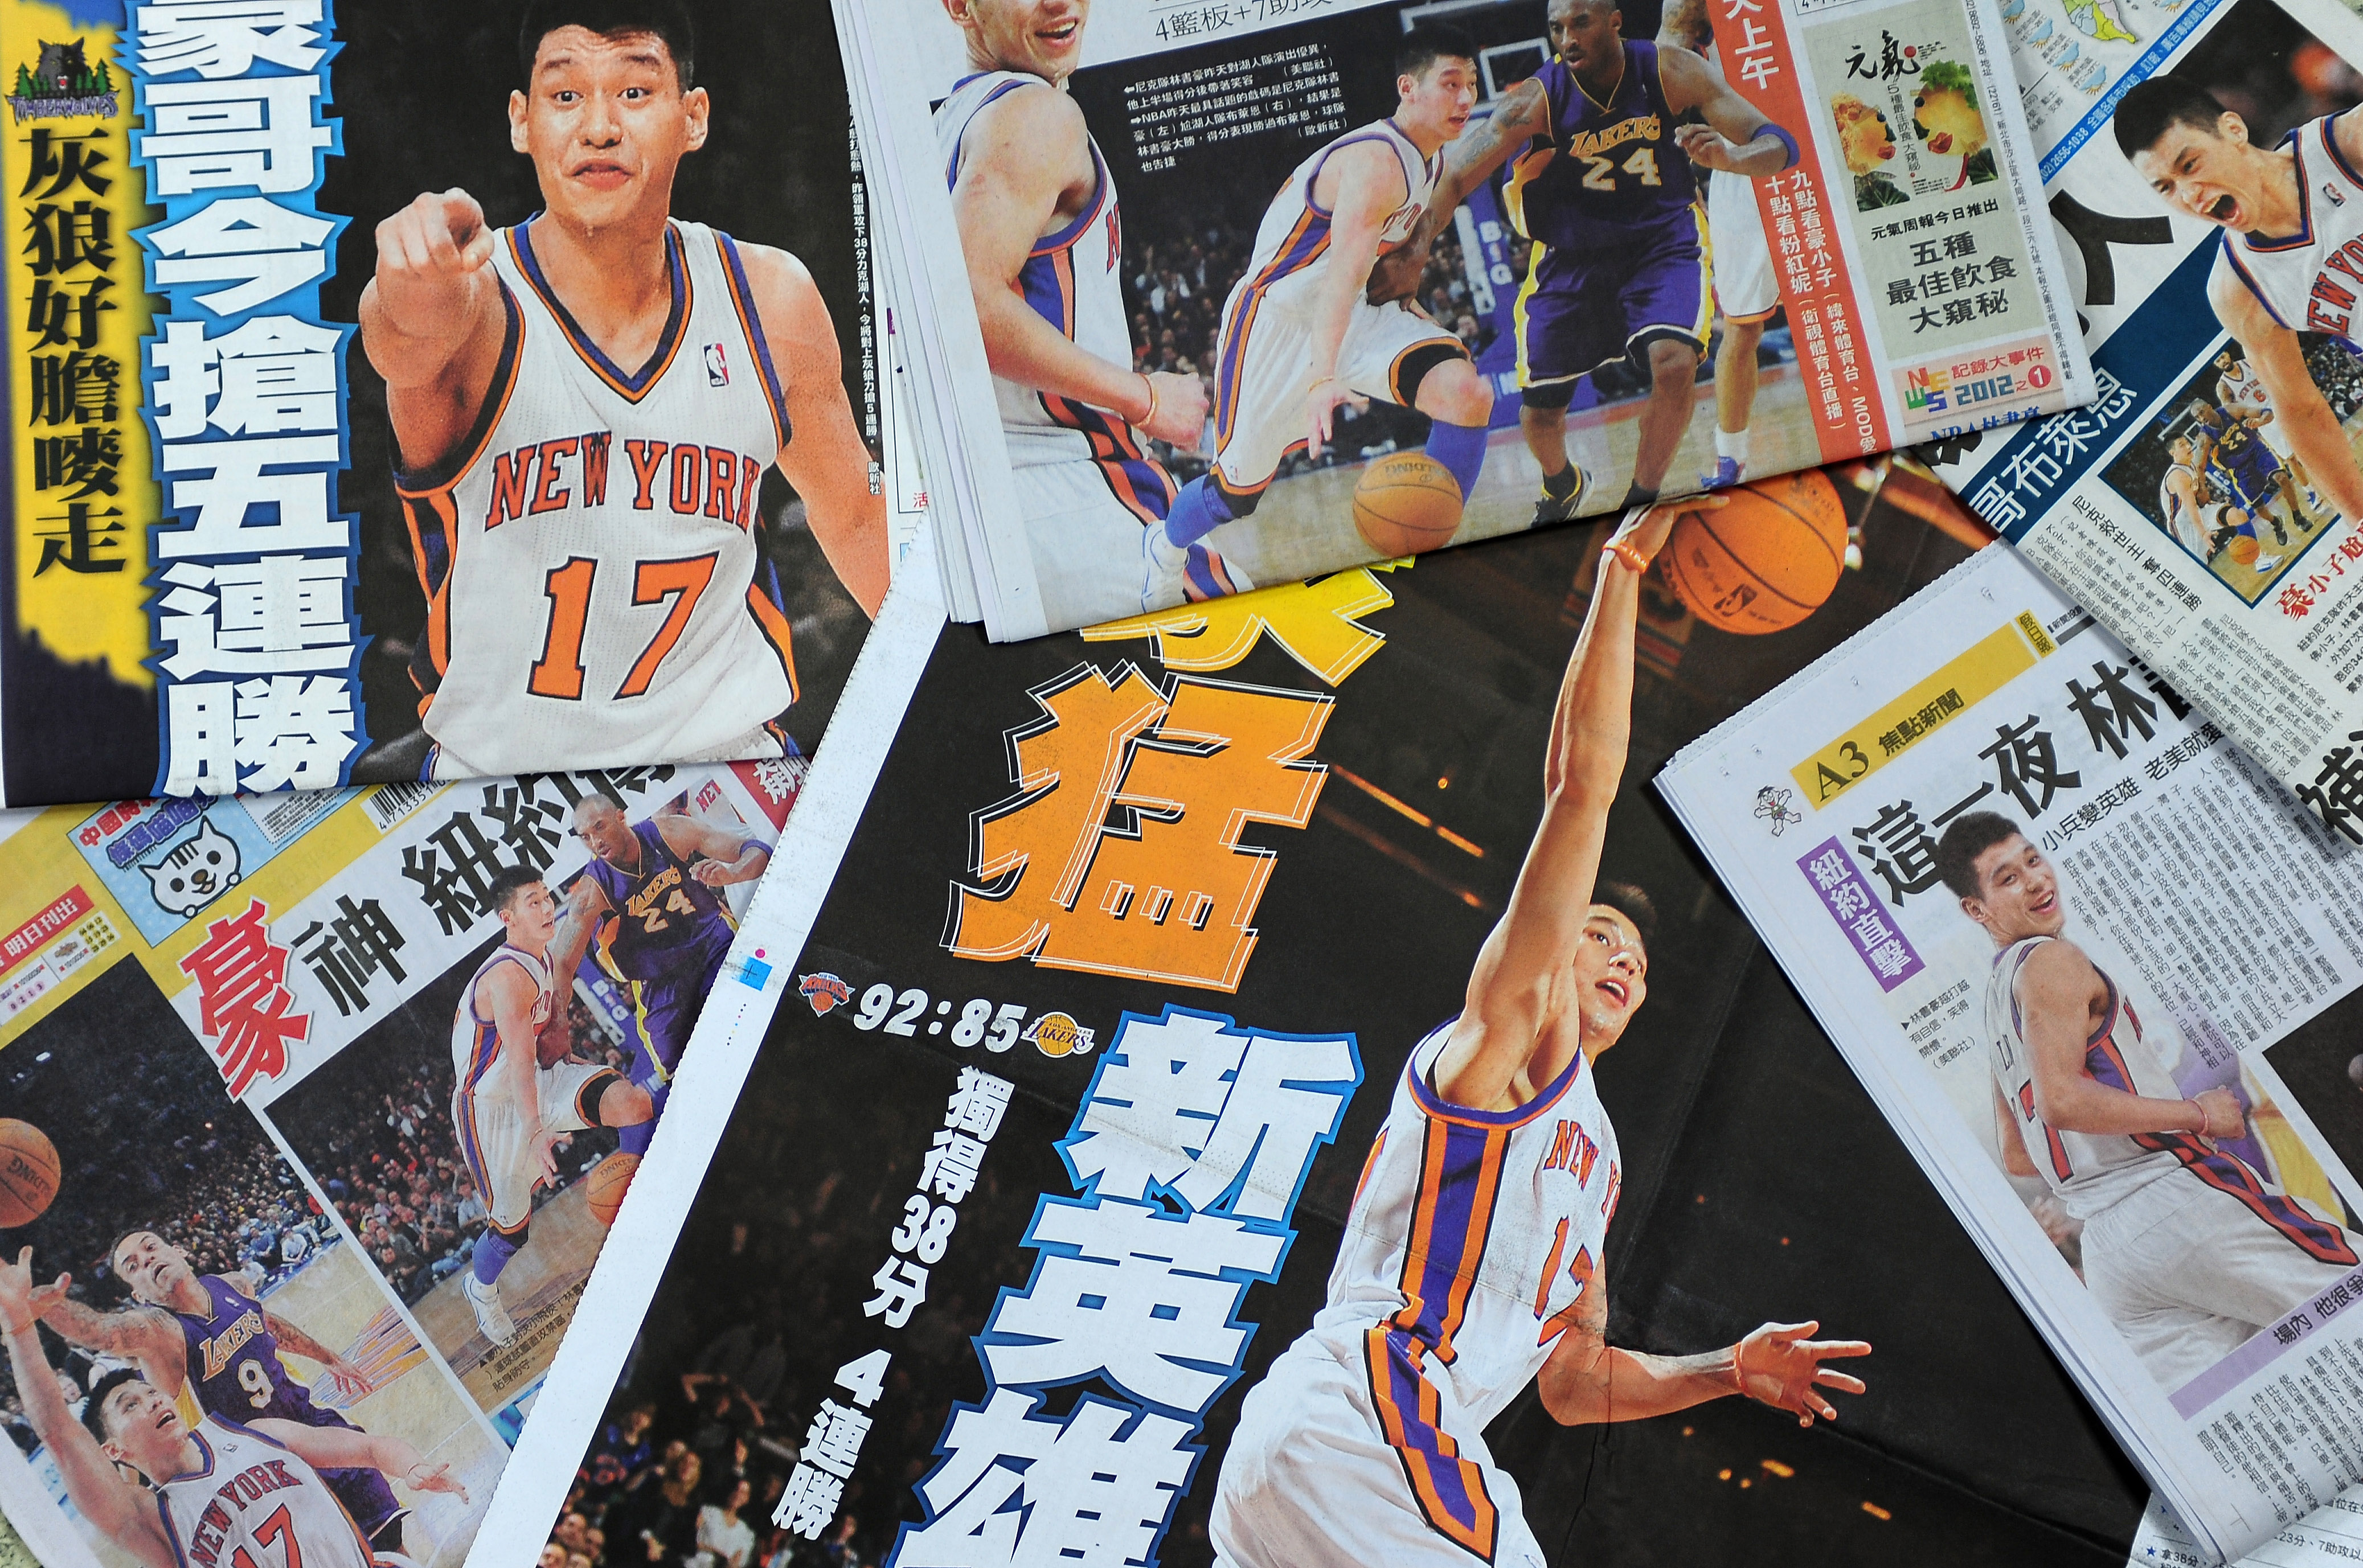 Jeremy Lin reportedly set to play in Taiwan, Taiwan News